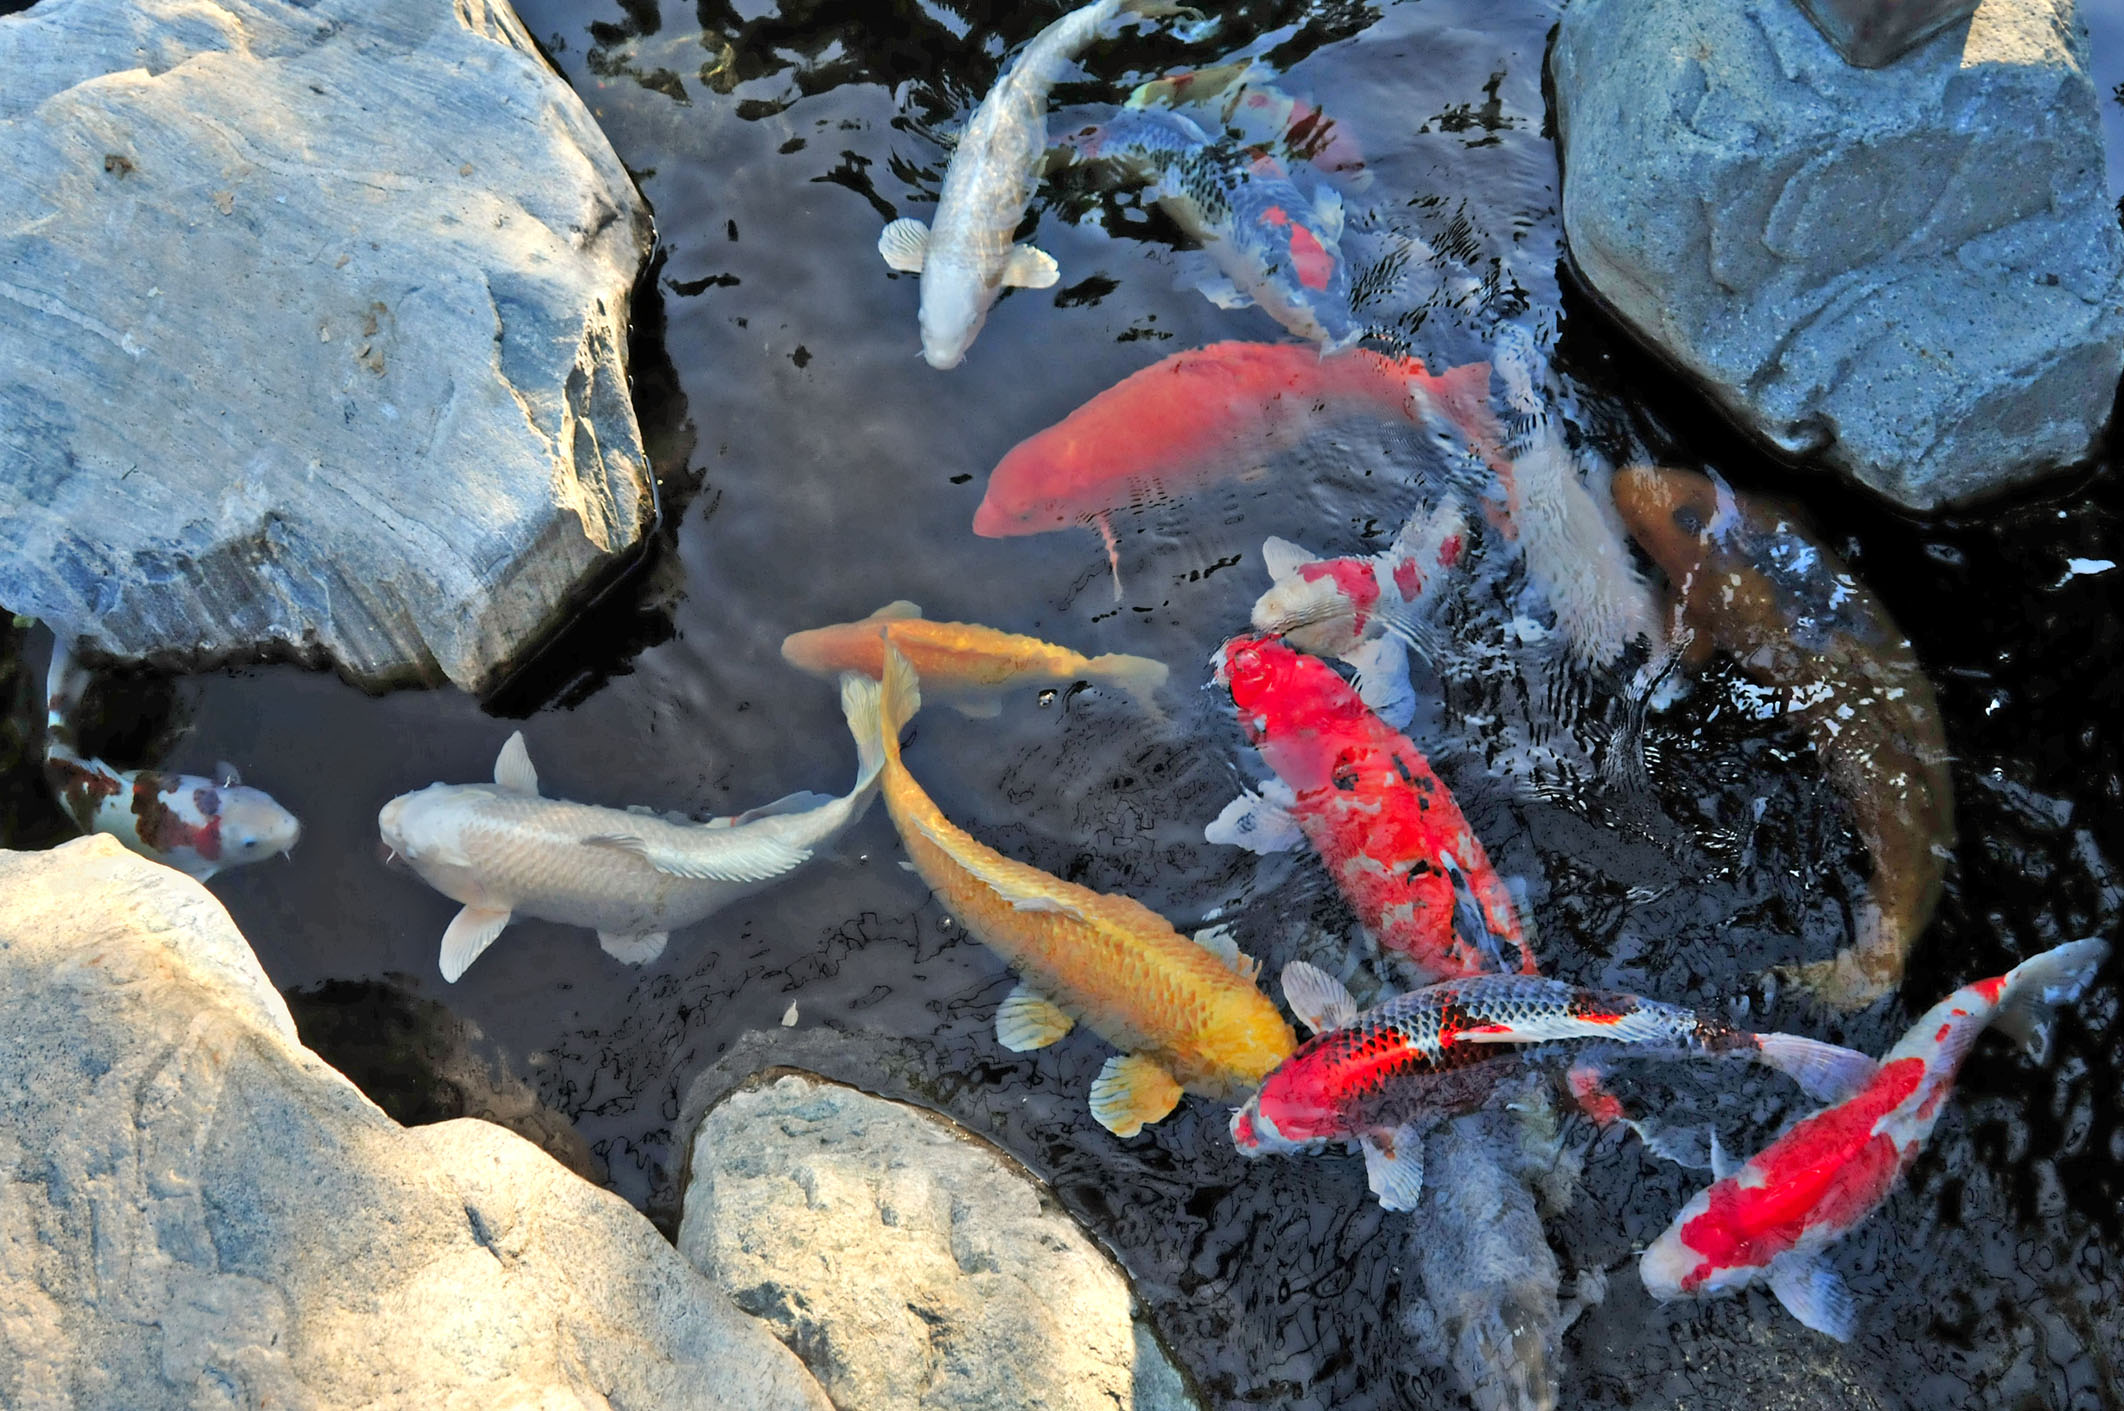 koid pond photo showing close up of fish